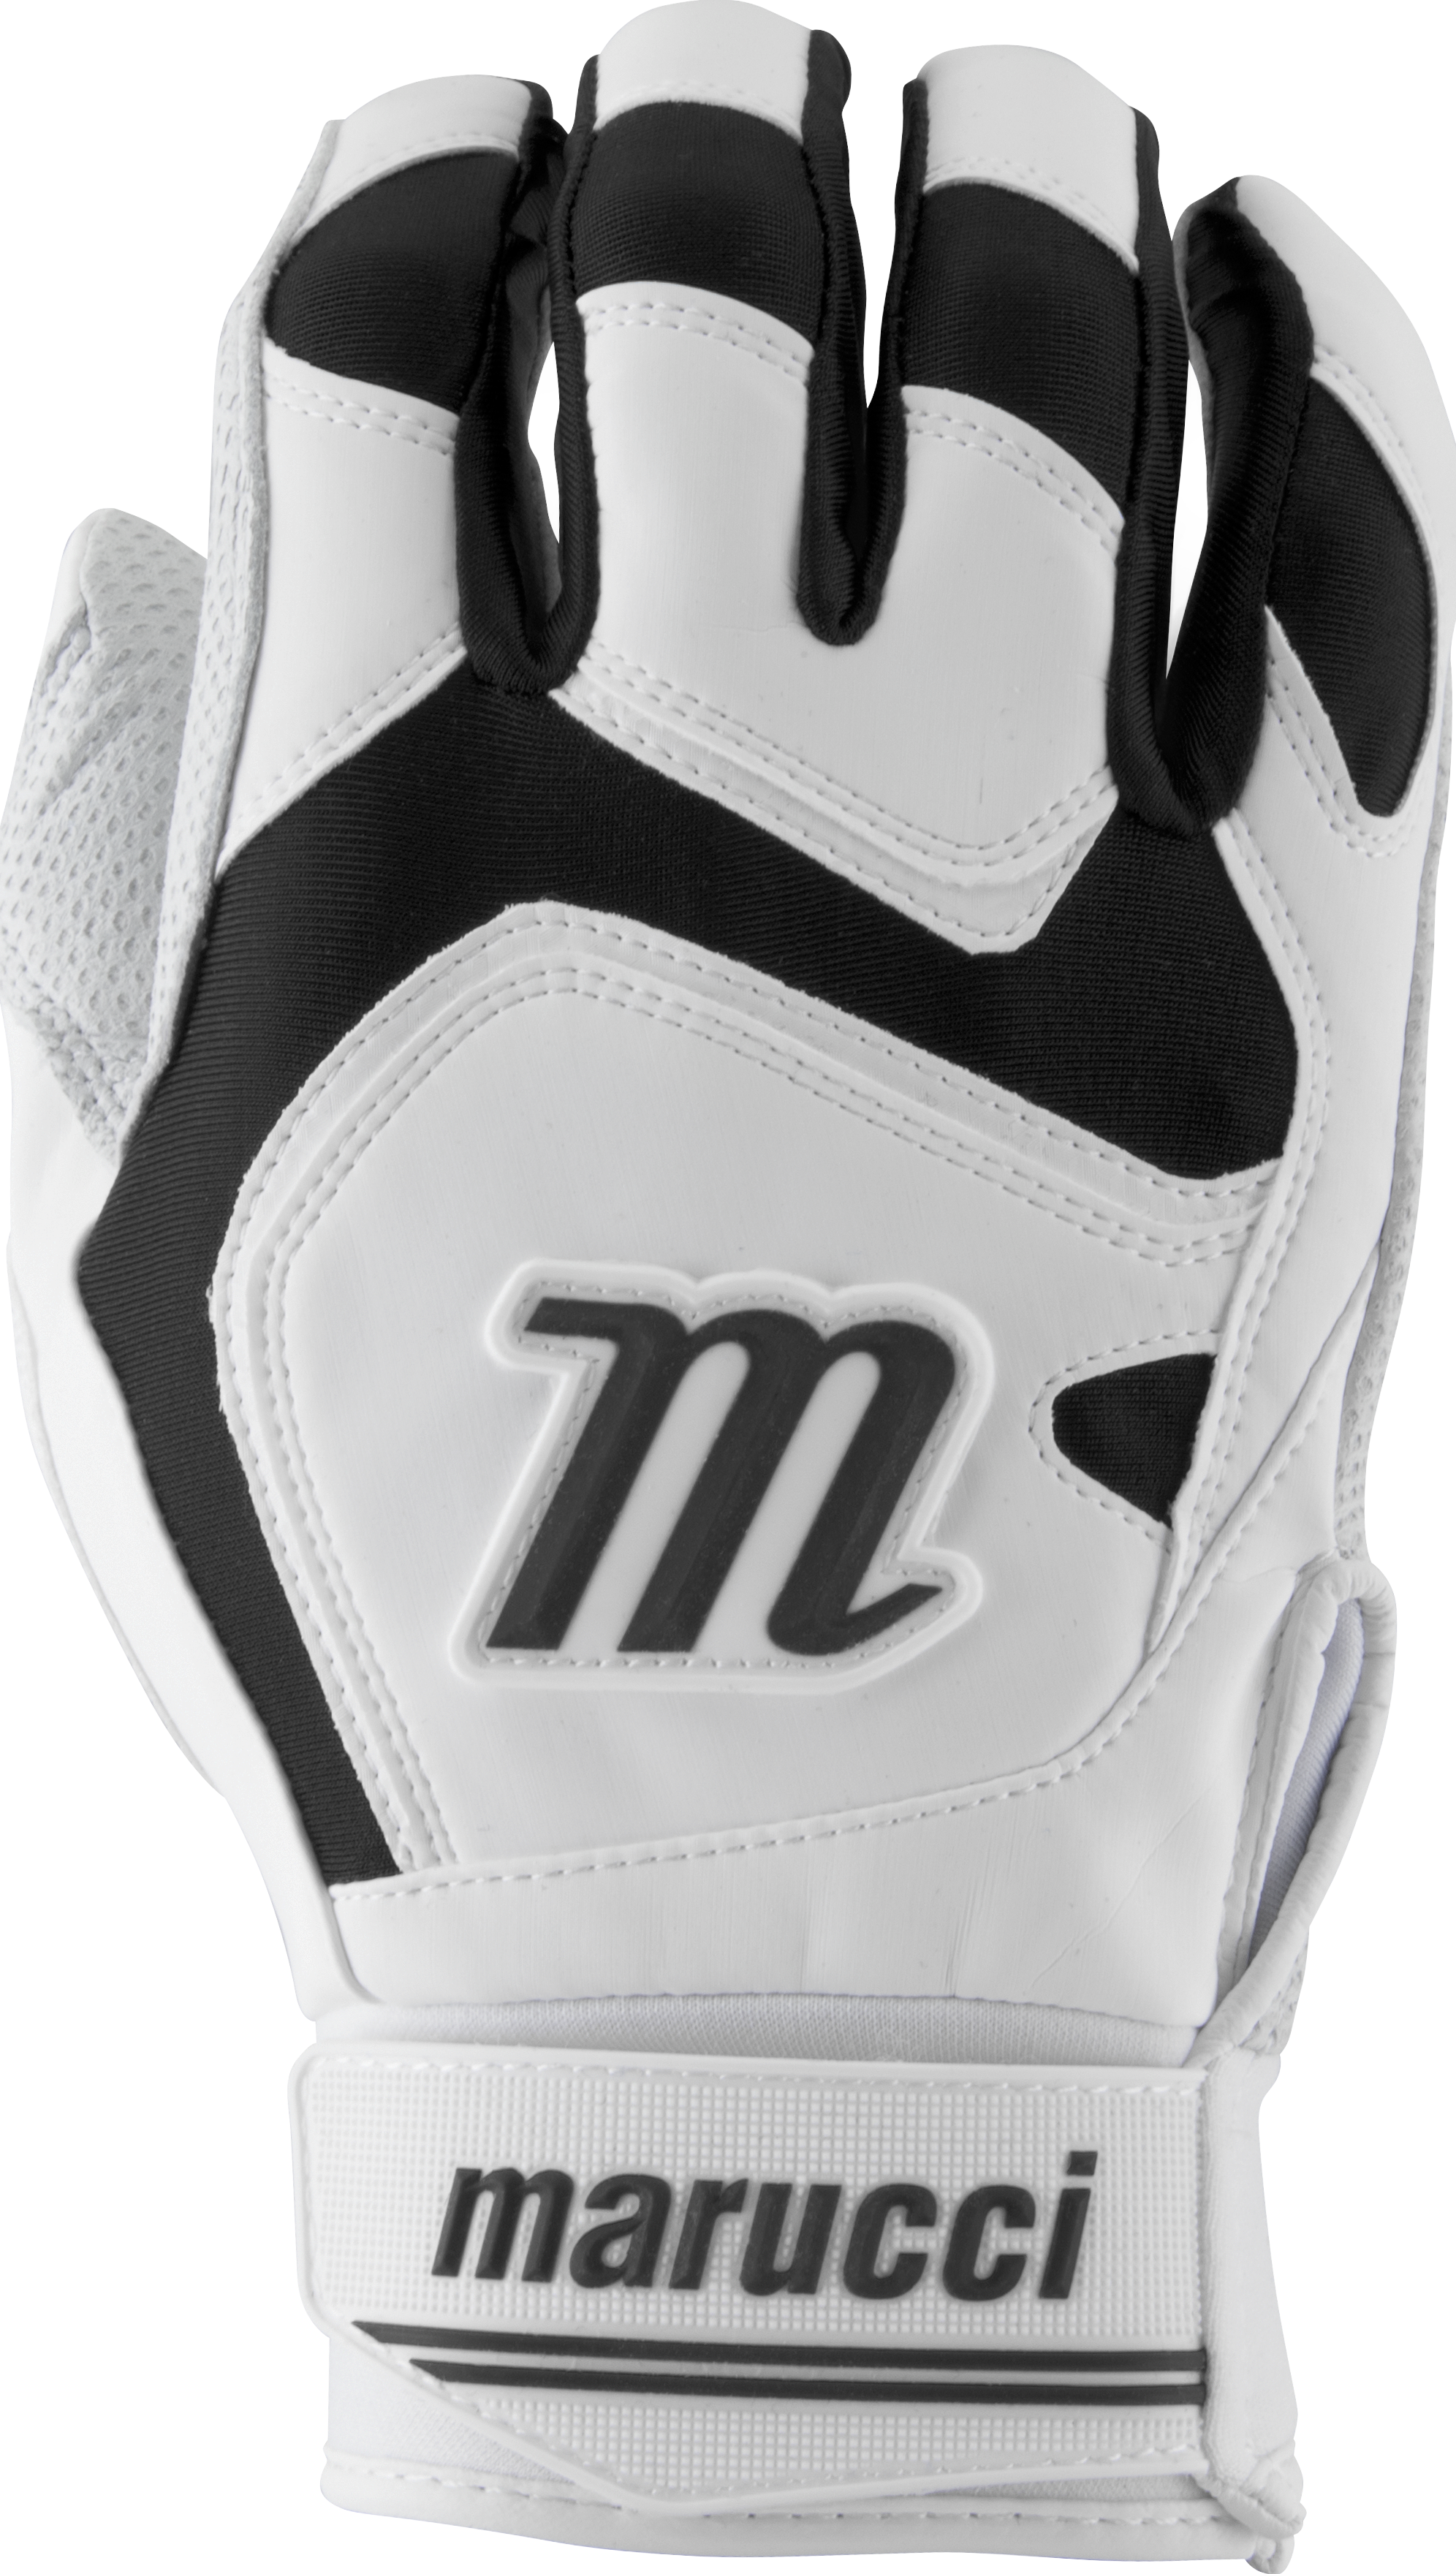 2019 Model: MBGSGN2-W/BK-AS Consistency And Craftsmanship Commitment To Quality And Understanding Of Players’ Color: Black Based in Baton Rouge Marucci Sports - 2019 Signature Batting Glove - Black (MBGSGN2-W/BK-AS) Baseball Performance Gear. As a company founded, majority-owned, and operated by current and former Big Leaguers, Marucci is dedicated to quality and committed to providing players at every level with the tools they want and need to be successful. Based in Baton Rouge, Louisiana, Marucci was founded by two former Big Leaguers and their athletic trainer who began handcrafting bats for some of the best players in the game from their garage. Fast forward 10 years, and that dedication to quality and understanding of players needs has turned into an All-American success story. Today, Marucci is the new Number One bat in the Big Leagues.